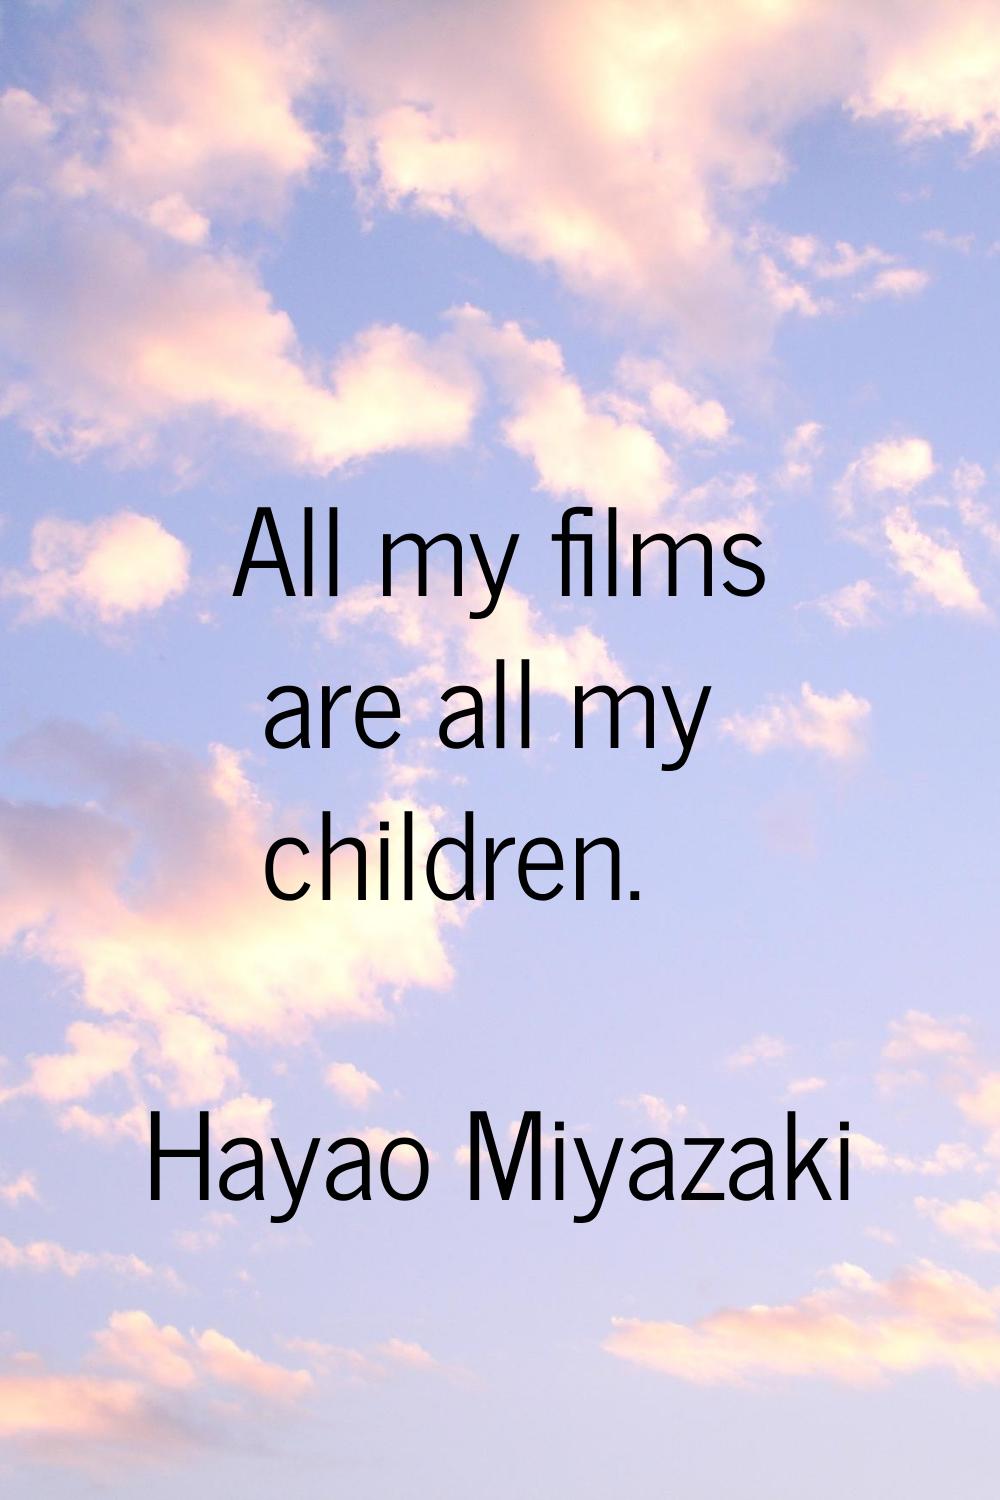 All my films are all my children.